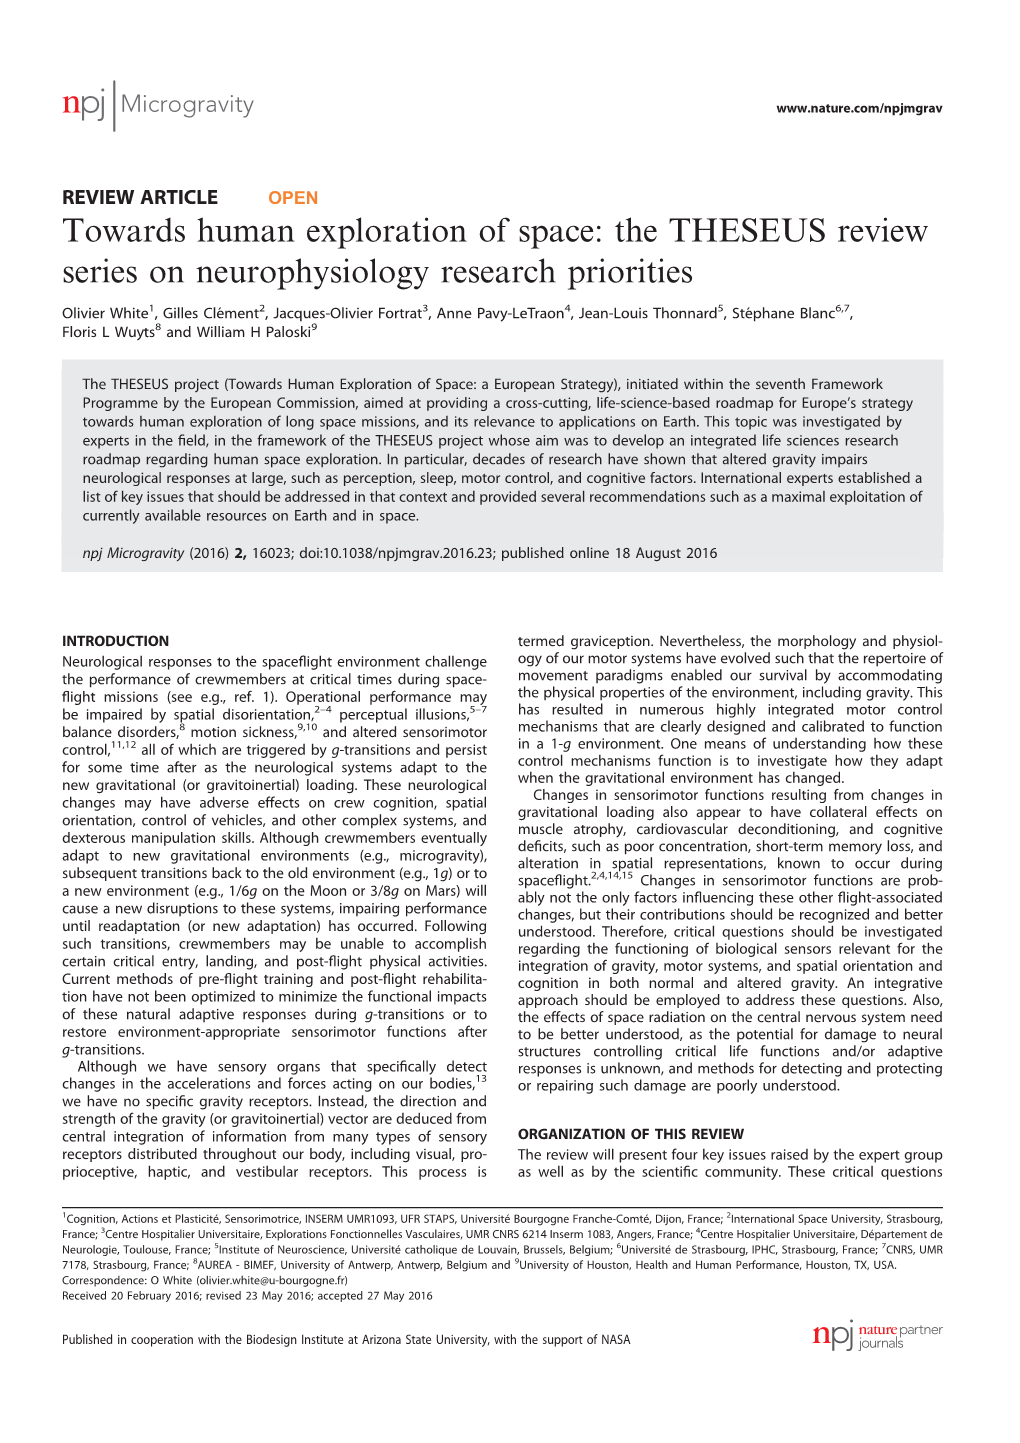 Towards Human Exploration of Space: the THESEUS Review Series on Neurophysiology Research Priorities